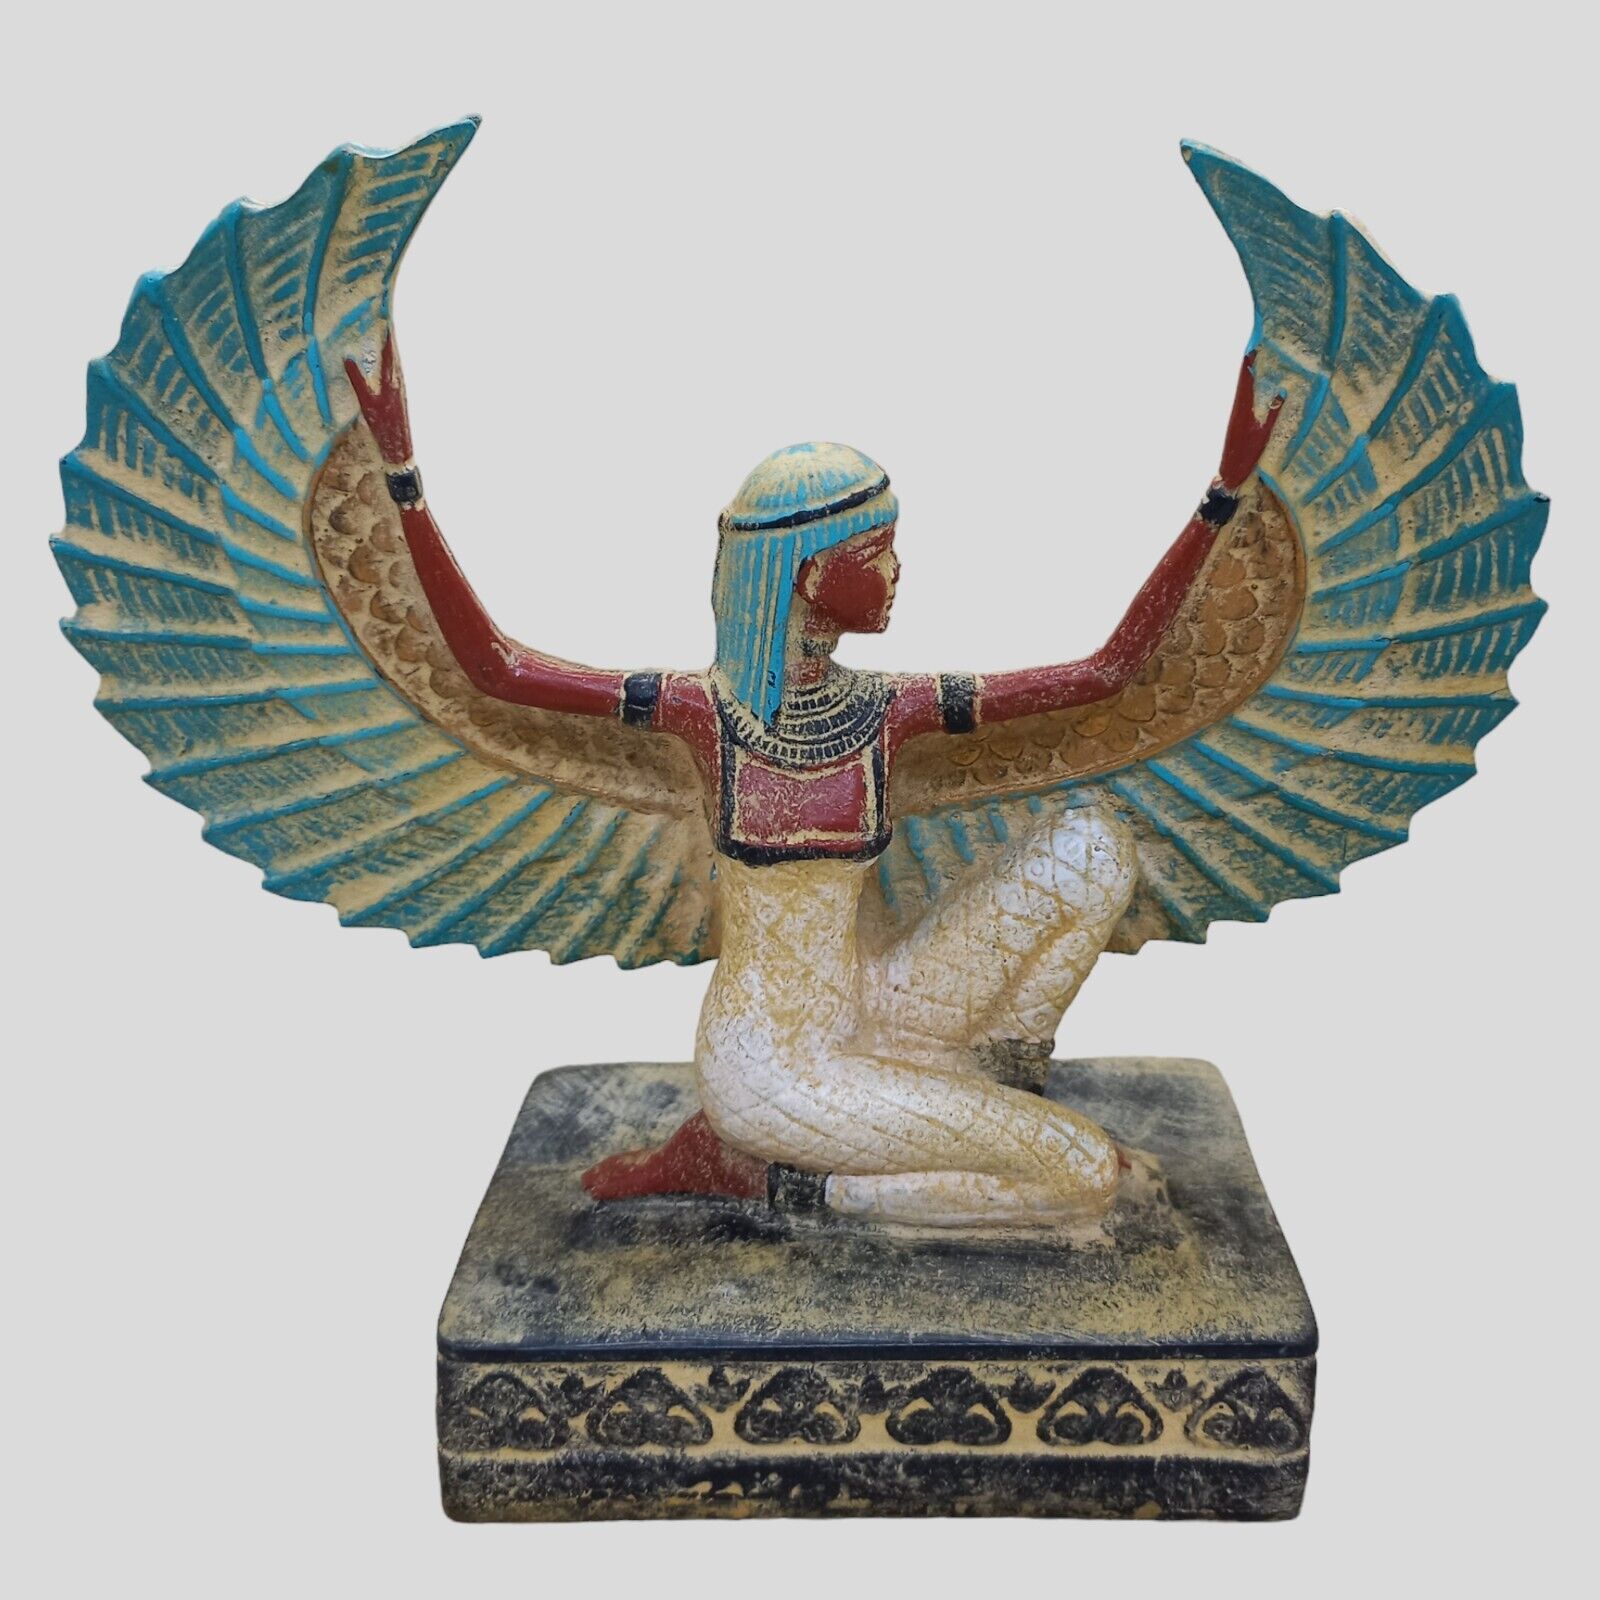 RARE ISIS WINGED STATUE FROM ANCIENT PHARAONIC EGYPT HISTORY ANTIQUITIES